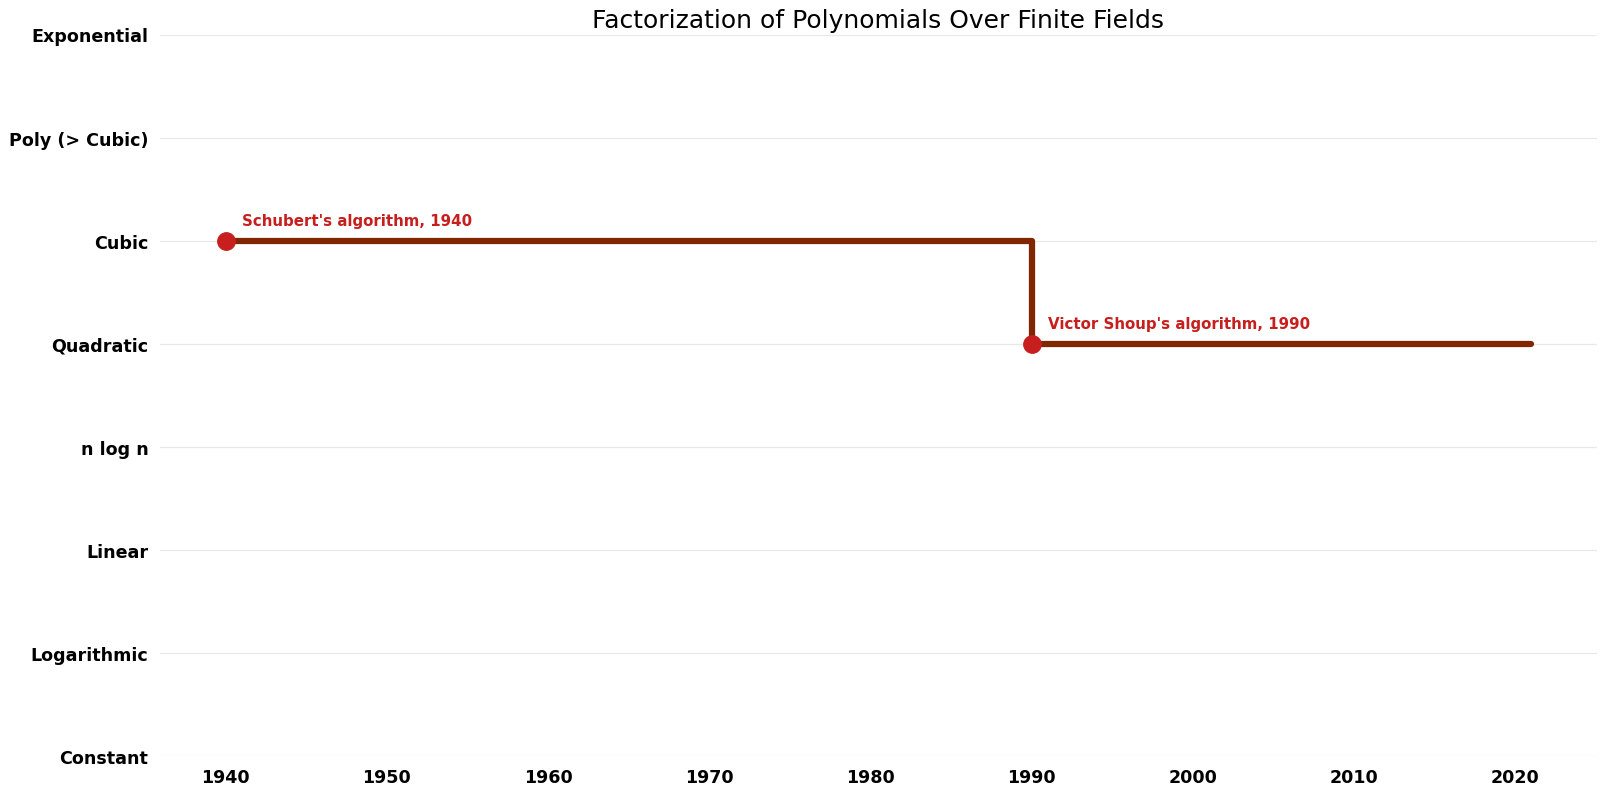 Factorization of Polynomials Over Finite Fields - Time.png